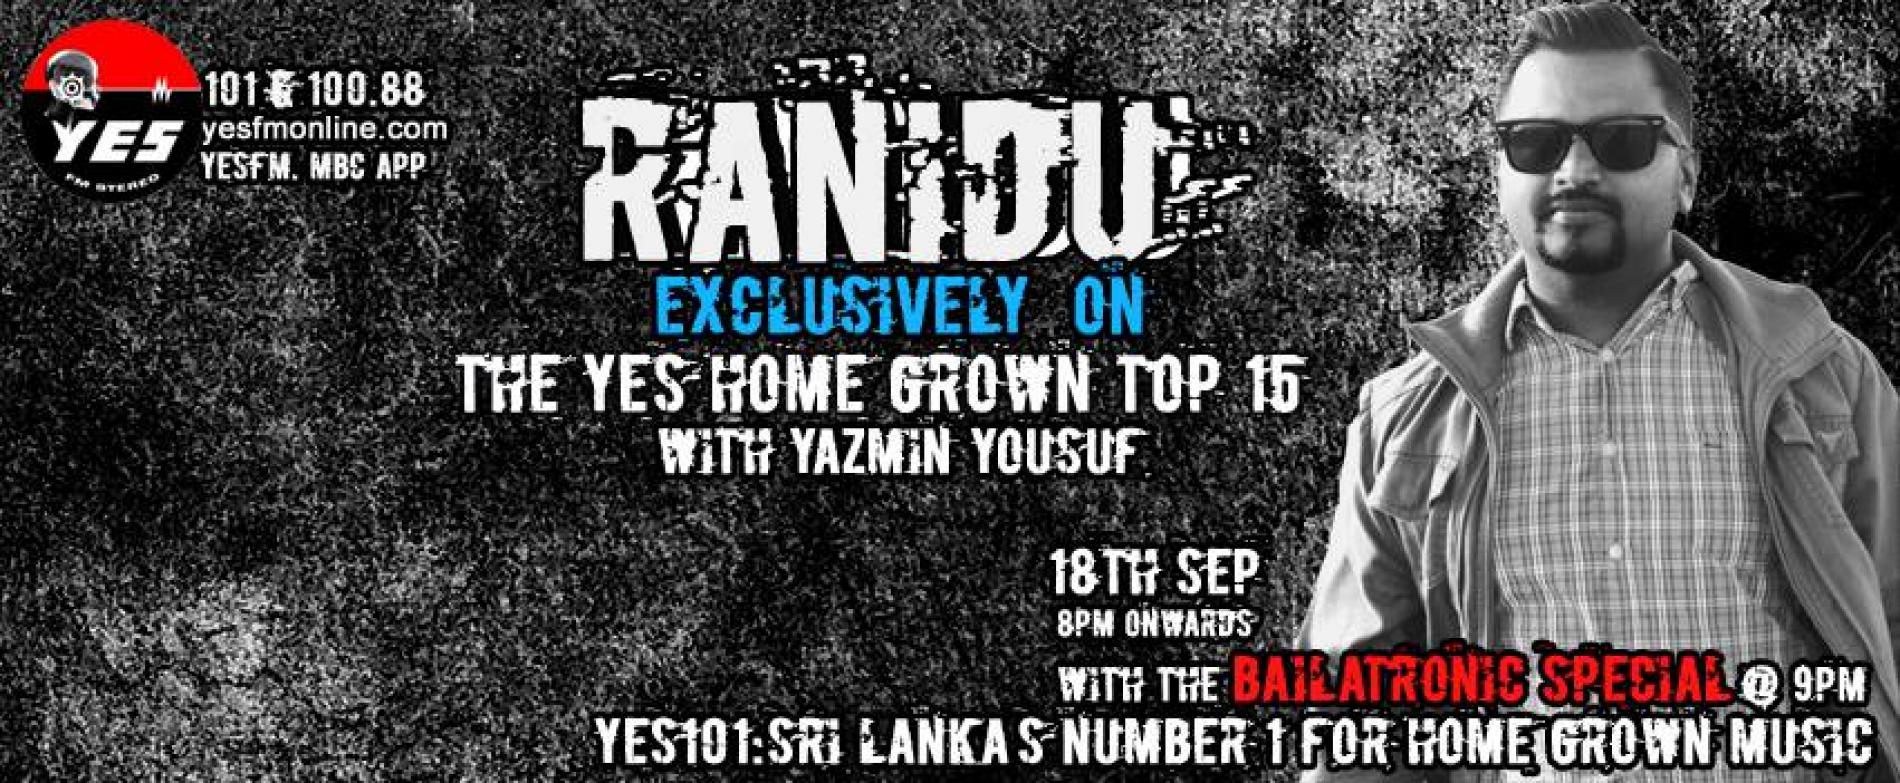 Ranidu On The YES Home Grown Top 15